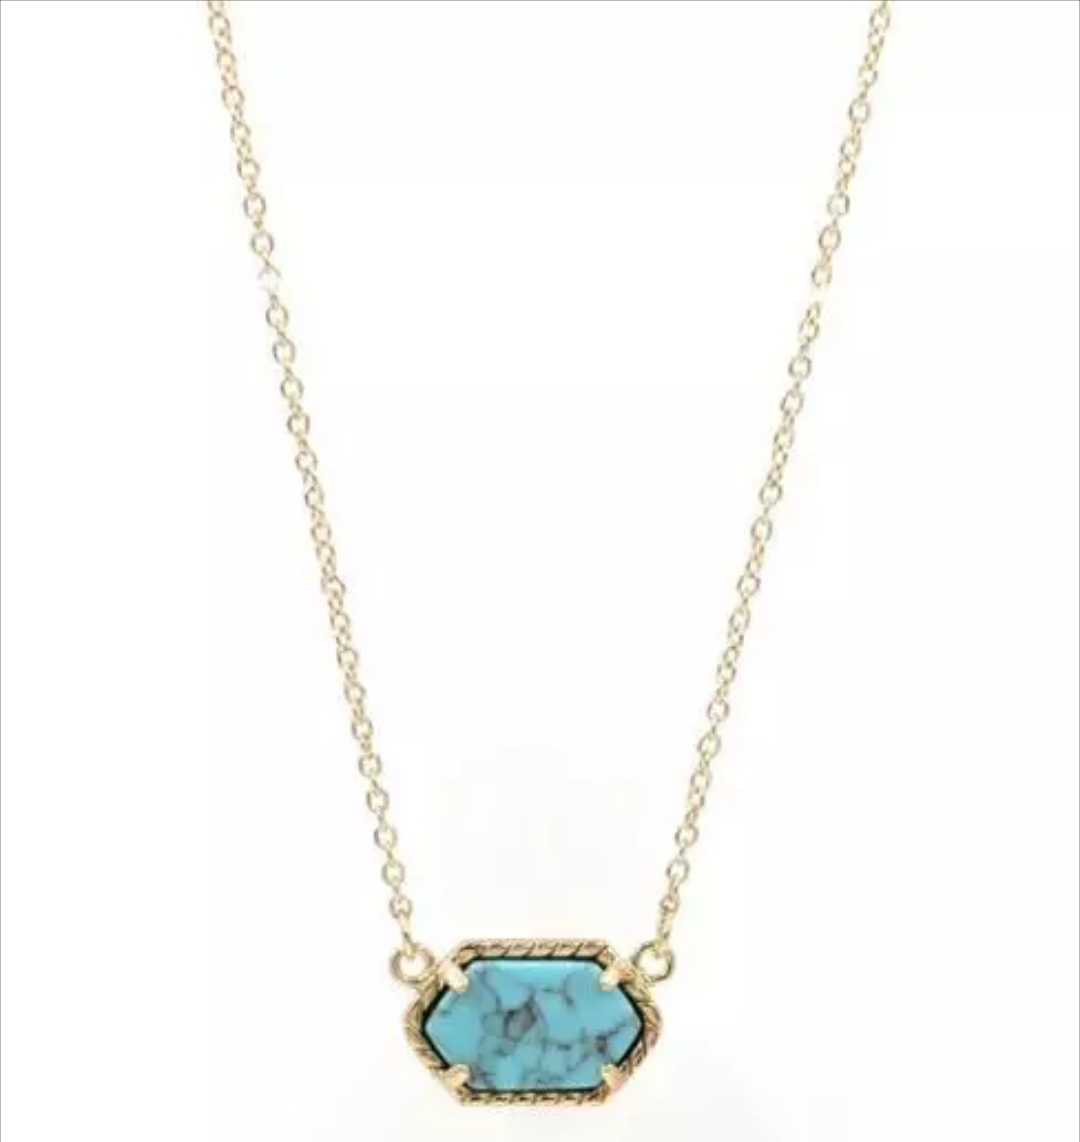 Turquoise Oval/ Geometric Choker/ Necklace – Kennedy Charm